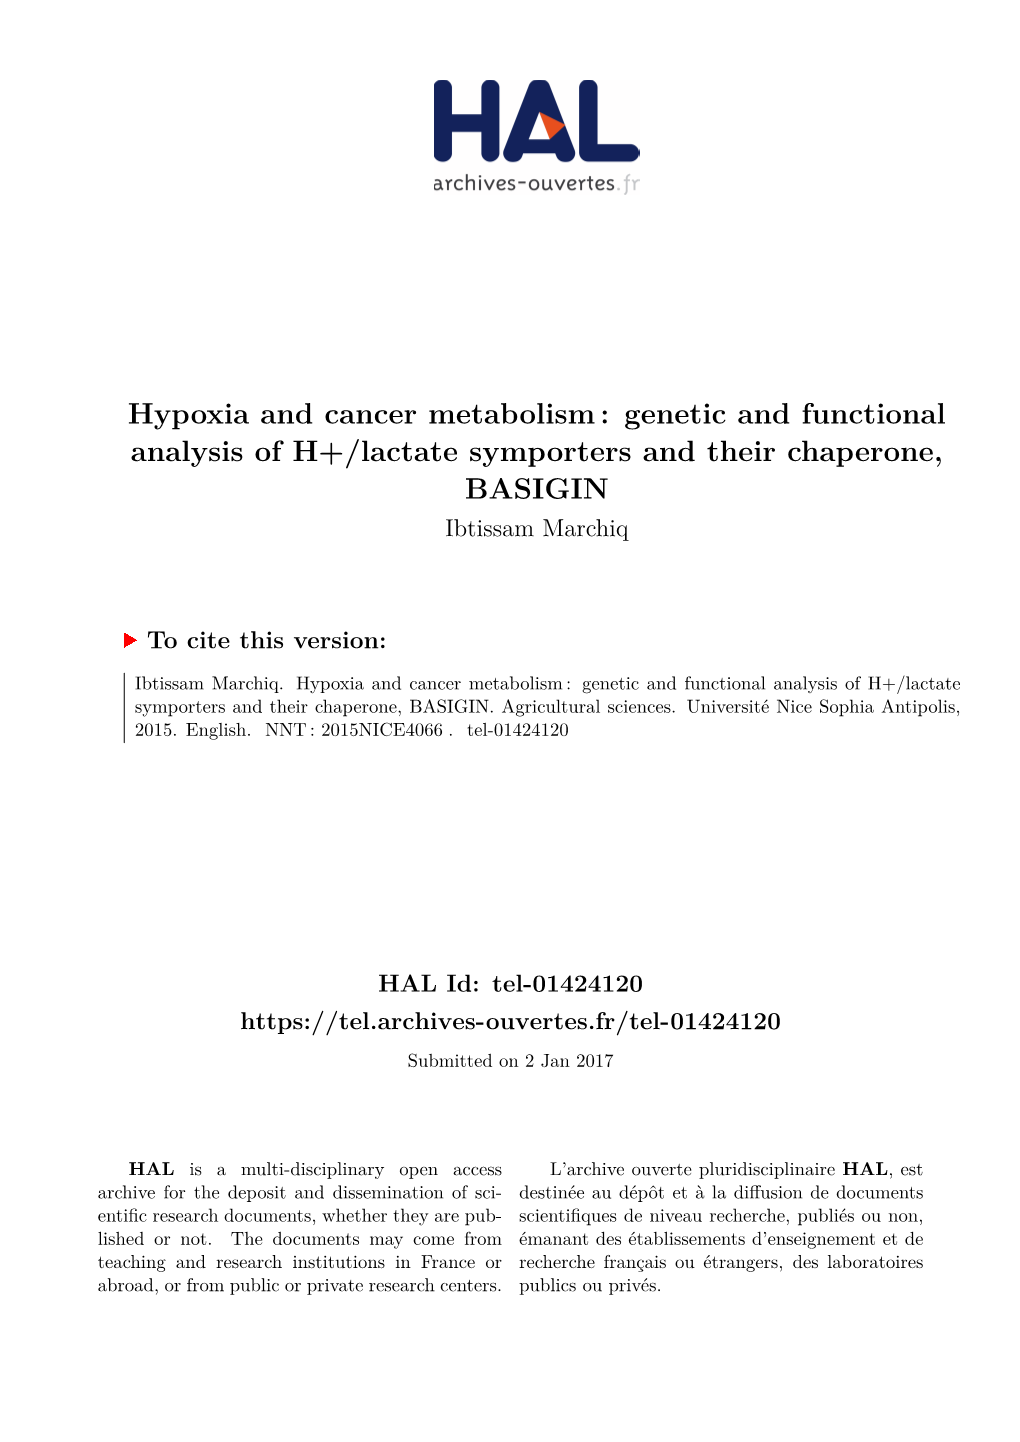 Hypoxia and Cancer Metabolism: Genetic and Functional Analysis of H+/Lactate Symporters and Their Chaperone, BASIGIN